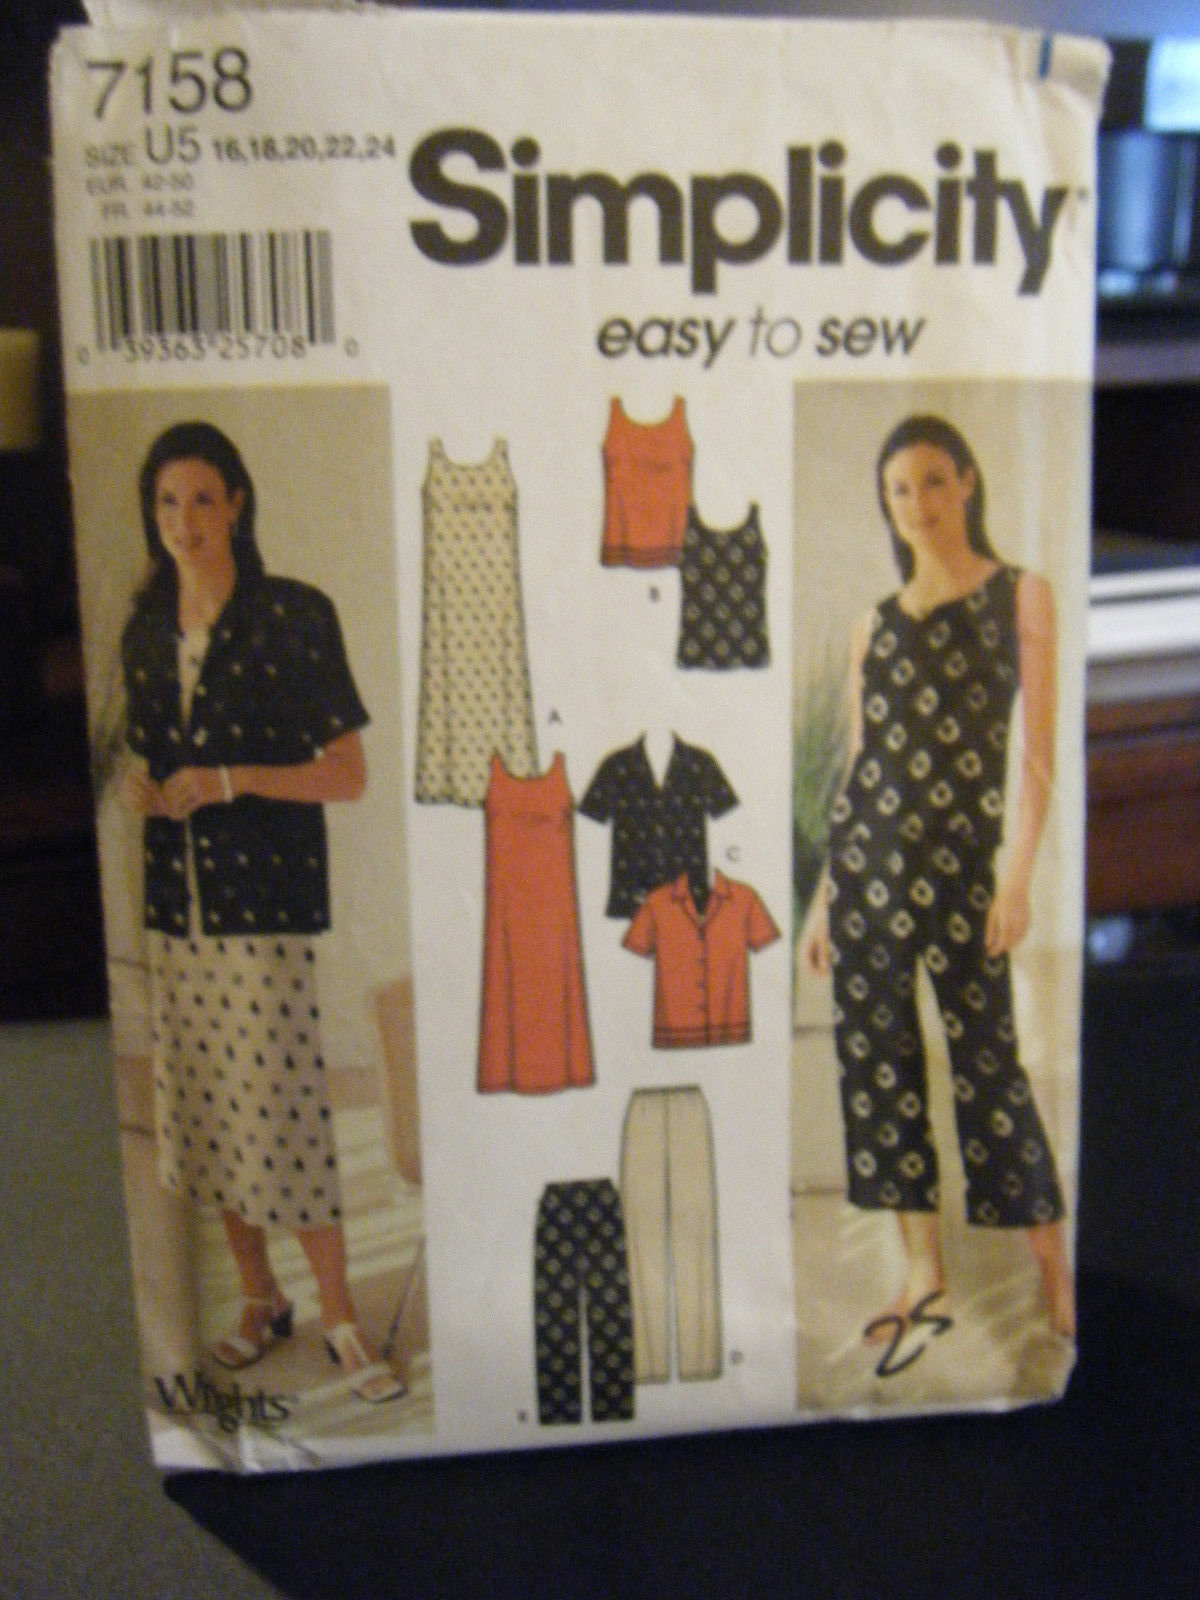 Primary image for Simplicity 7158 Dress, Top, Shirt & Pants in 2 Lengths Pattern - Size 16 & 18